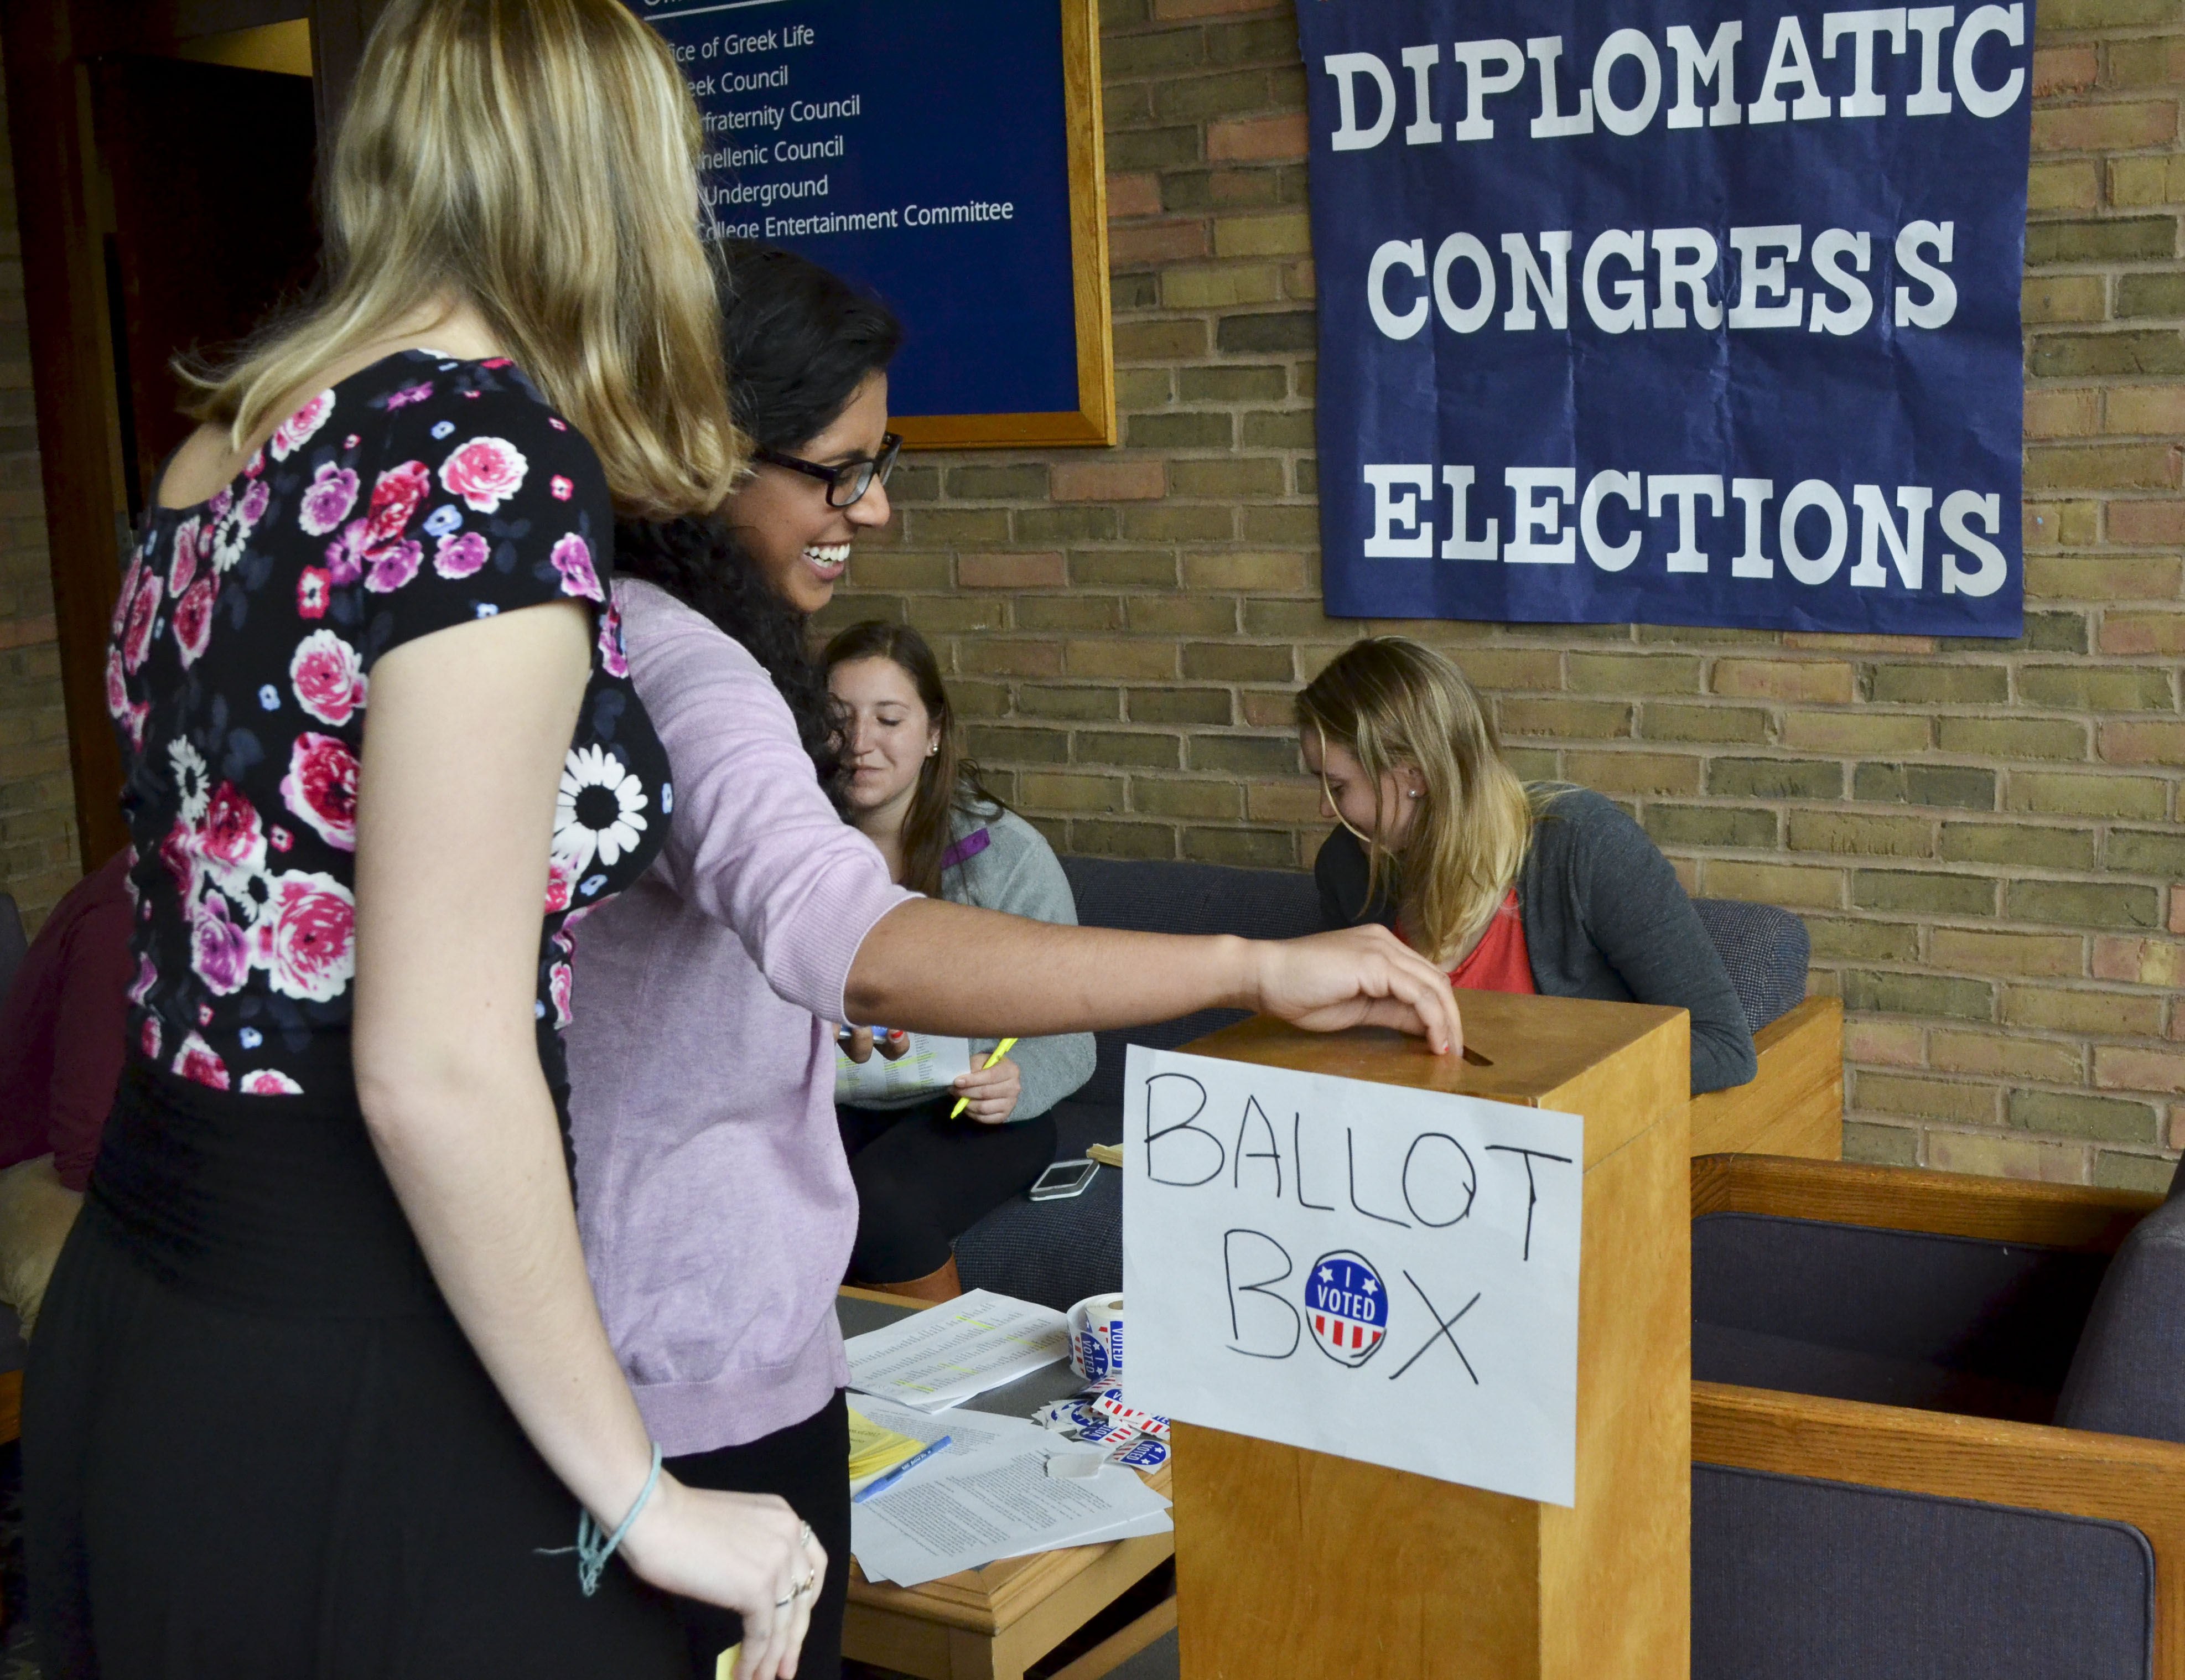 Last Tuesday, students voted for their class president on the second floor of the Steinman College Center from 8:30 a.m. to 4:30 p.m. Photo by Caylah Coffeen '17